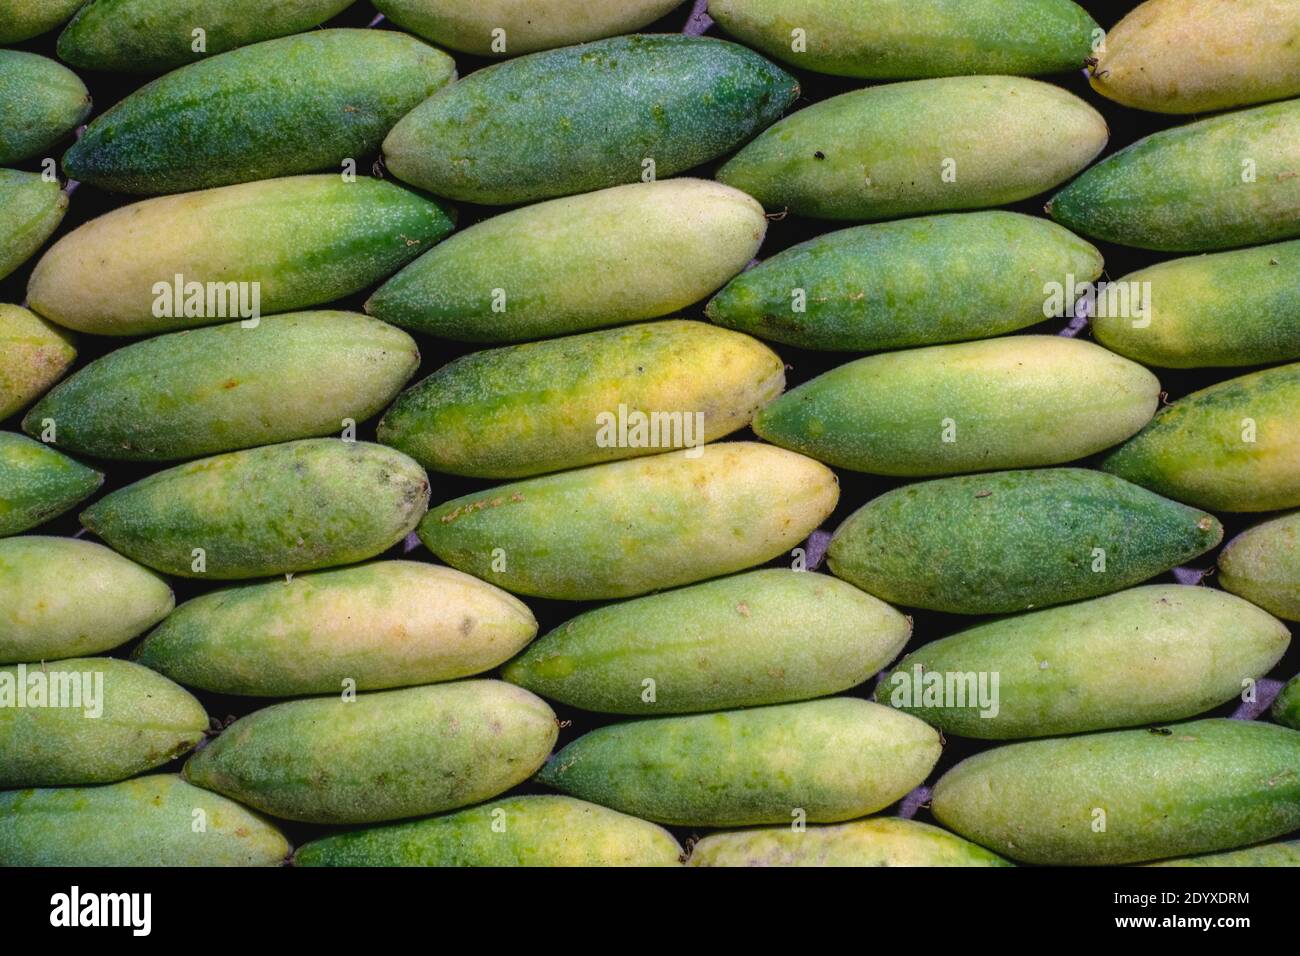 green, bunch, banana, madeira, portugal, portuguese, tropical, cluster, vertical, tasty, nutricious, long, , fruit, nature, food, organic, agriculture Stock Photo